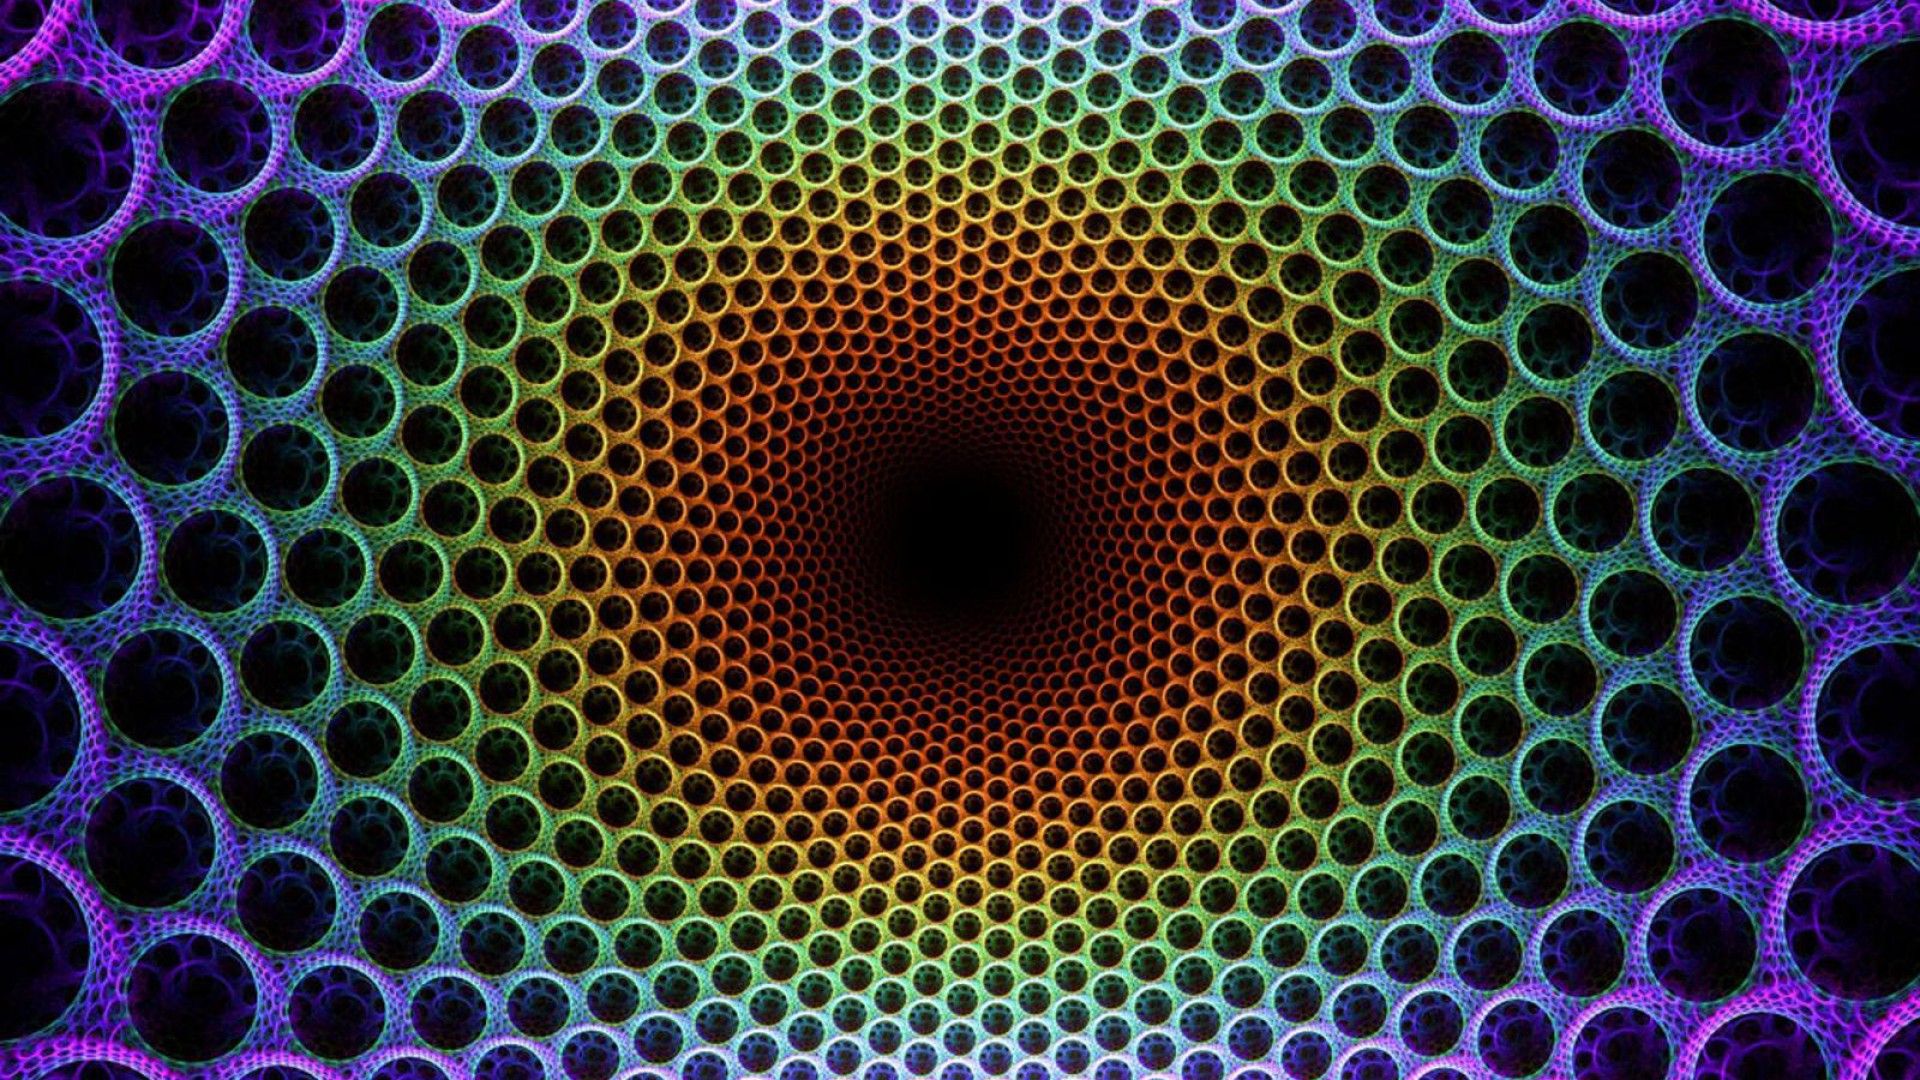 Trippy Wallpaper Photos Download The BEST Free Trippy Wallpaper Stock  Photos  HD Images